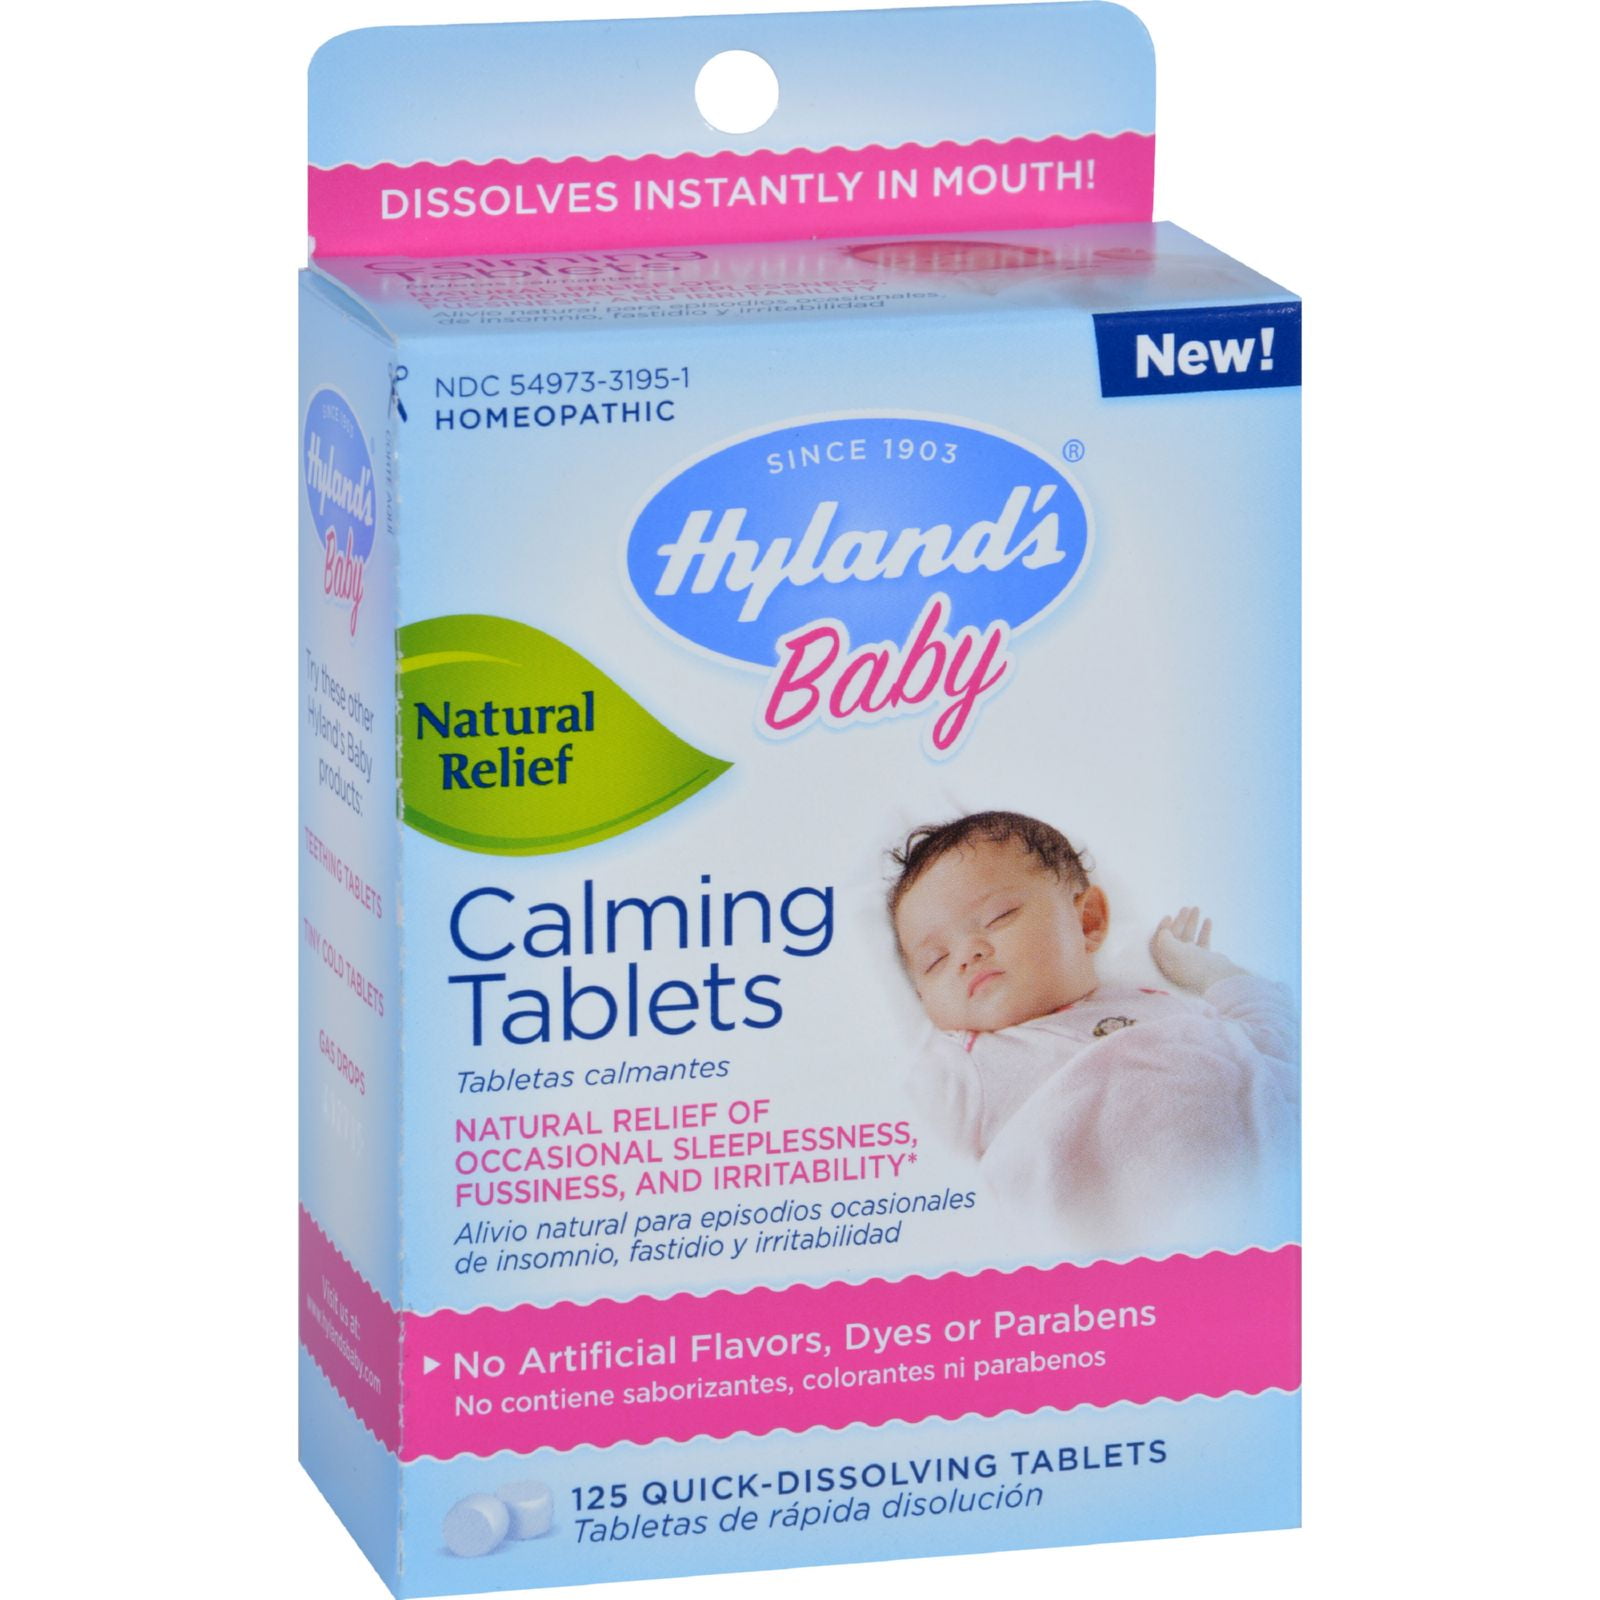 Hylands Homeopathic Calming Tablets Baby 125 QuickDissolving